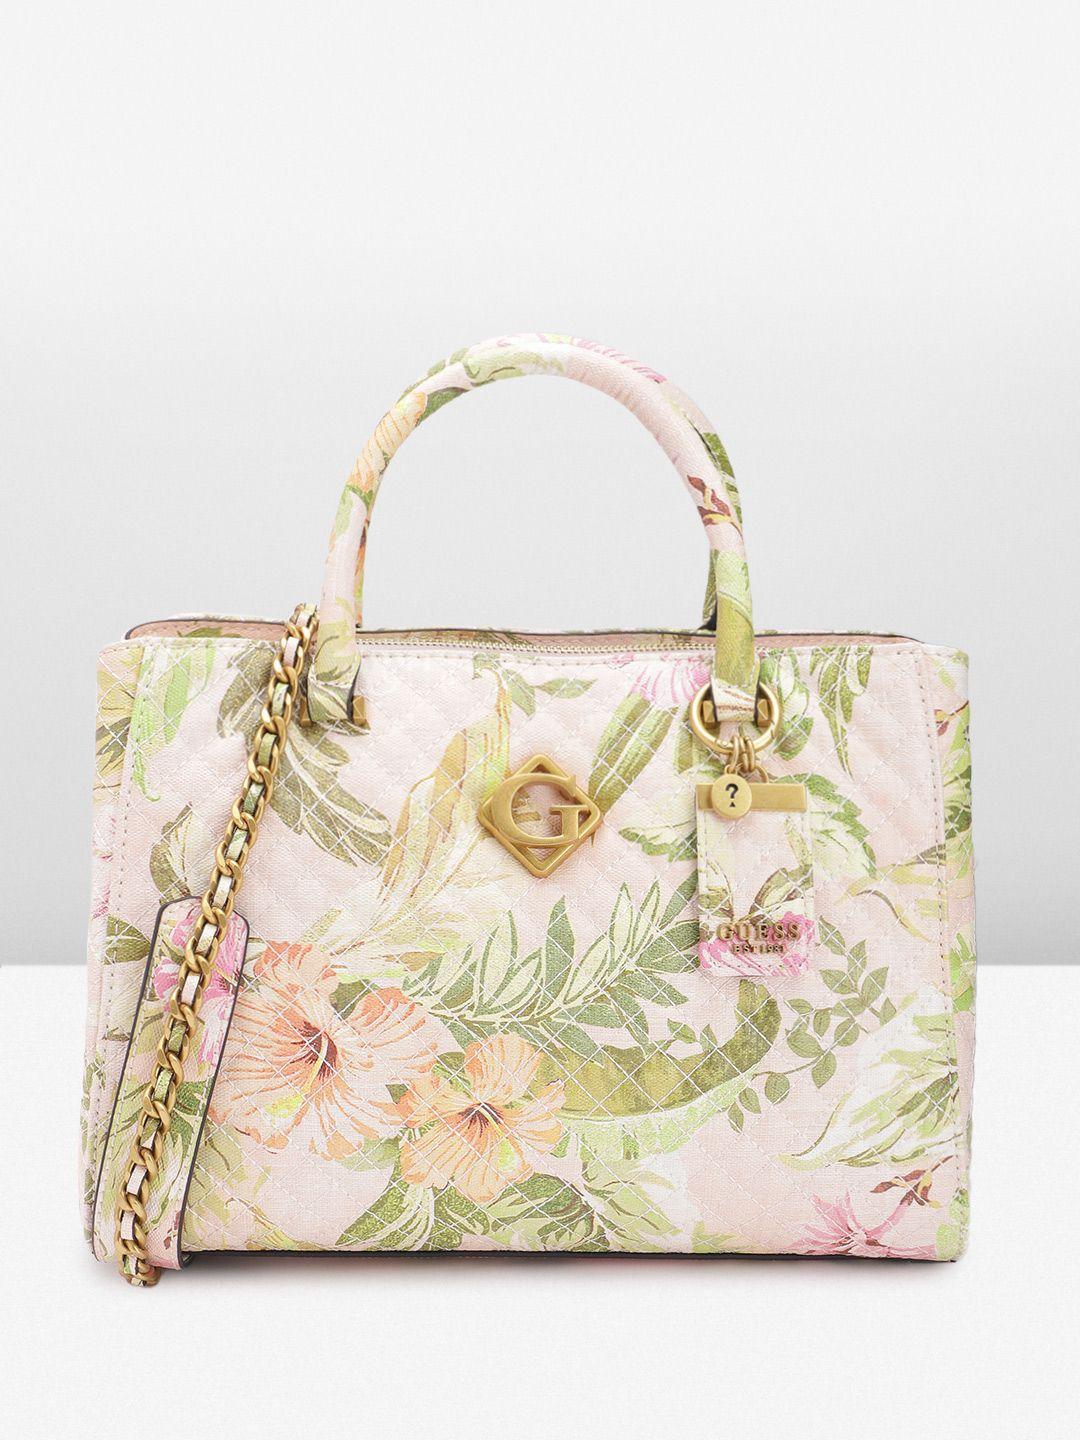 guess floral printed textured structured handheld bag